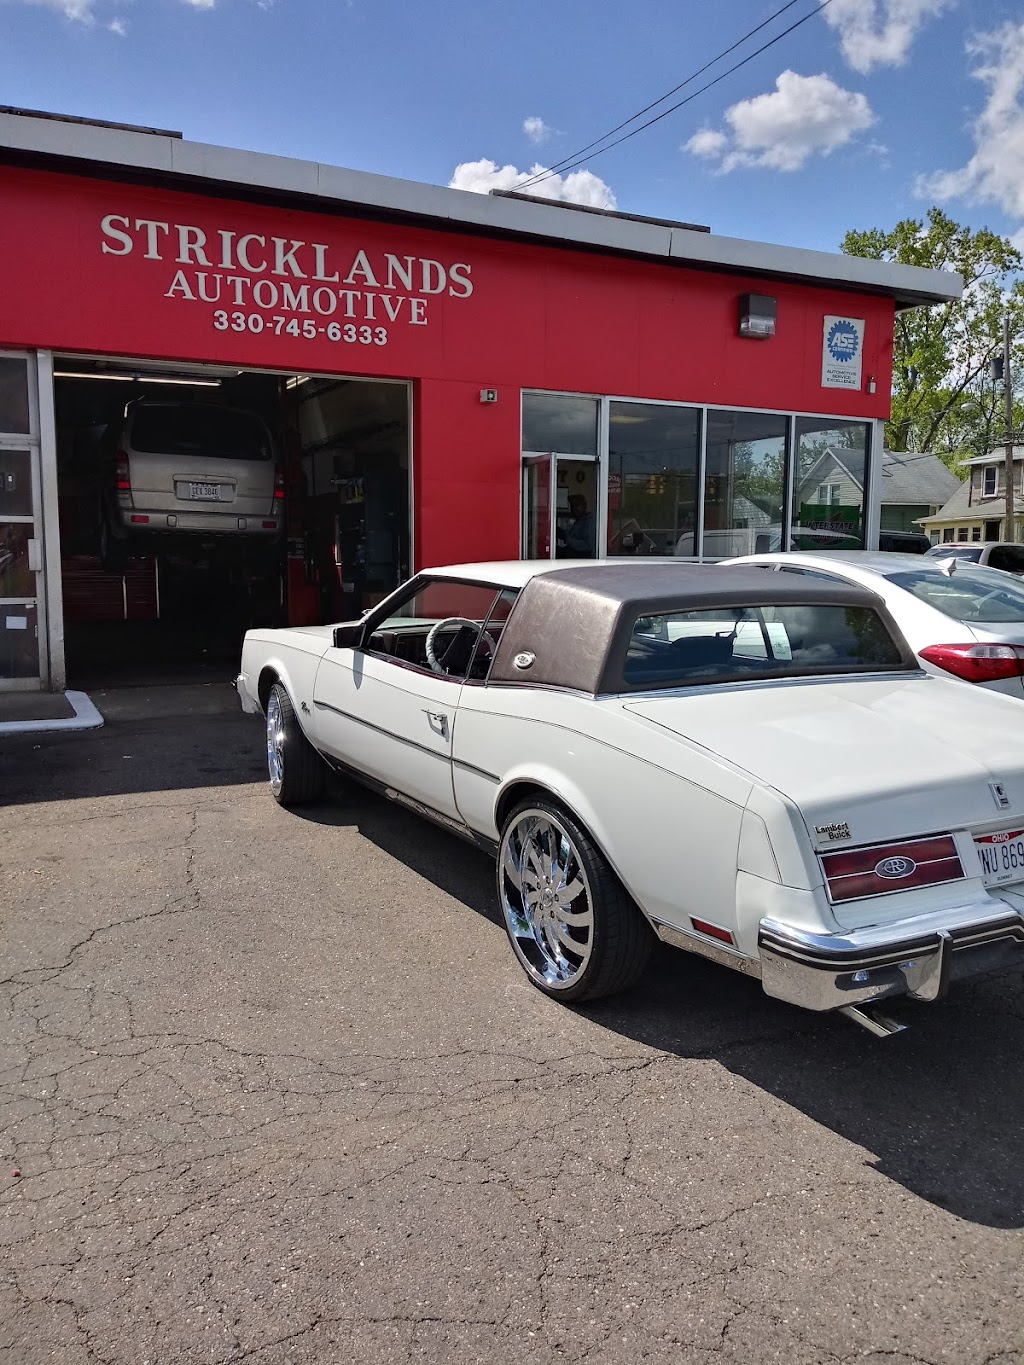 Stricklands Automotive | 2110 East Ave, Akron, OH 44314, USA | Phone: (330) 745-6333